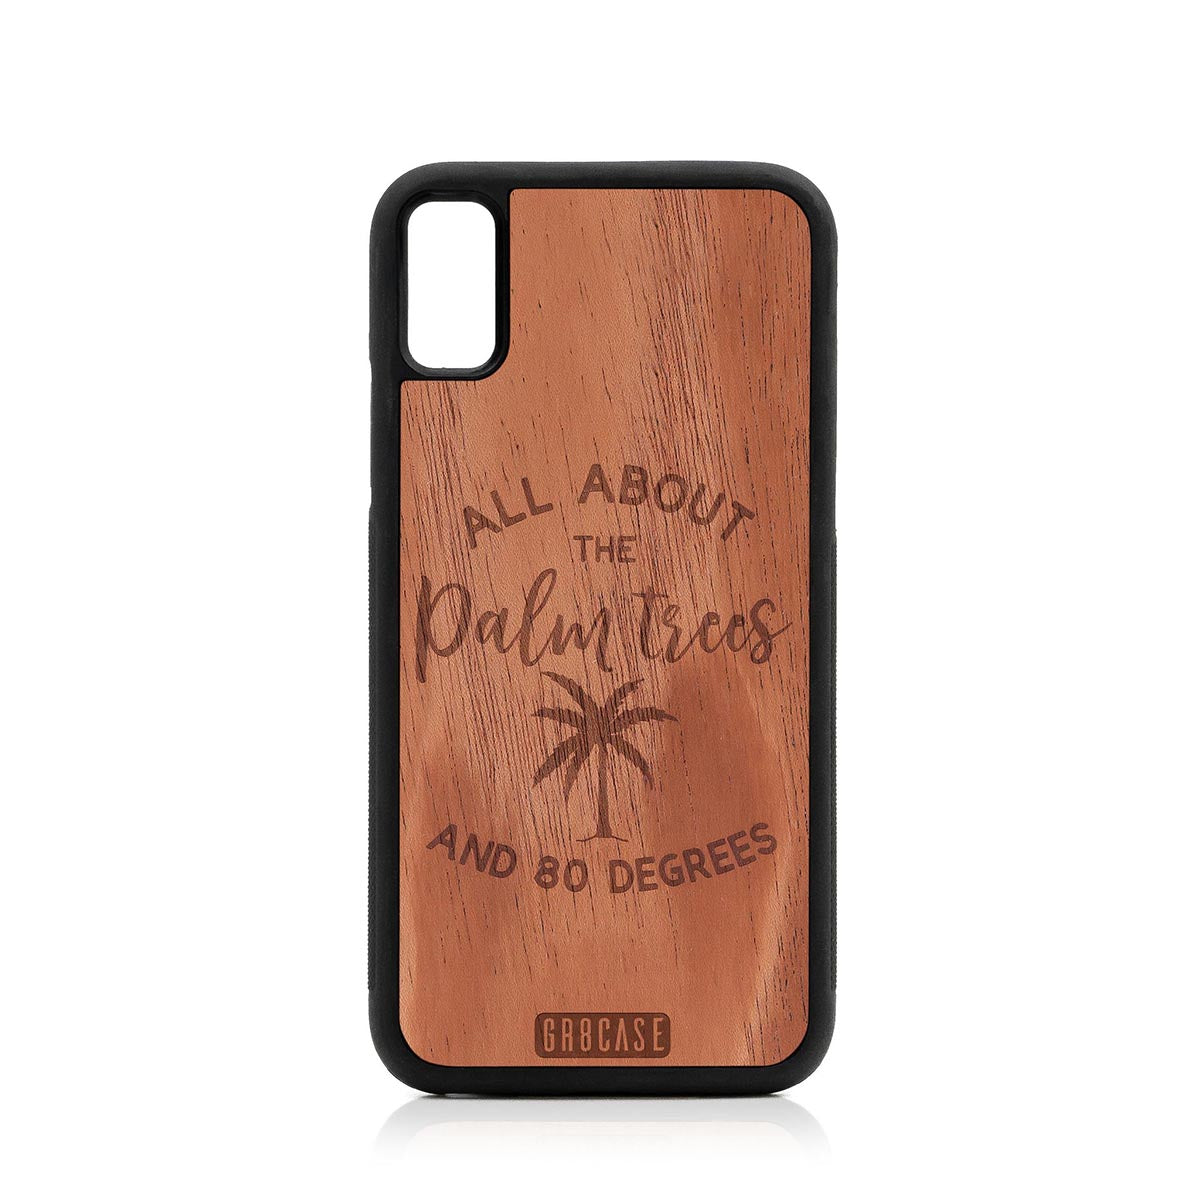 All About The Palm Trees and 80 Degrees Design Wood Case For iPhone XS Max by GR8CASE